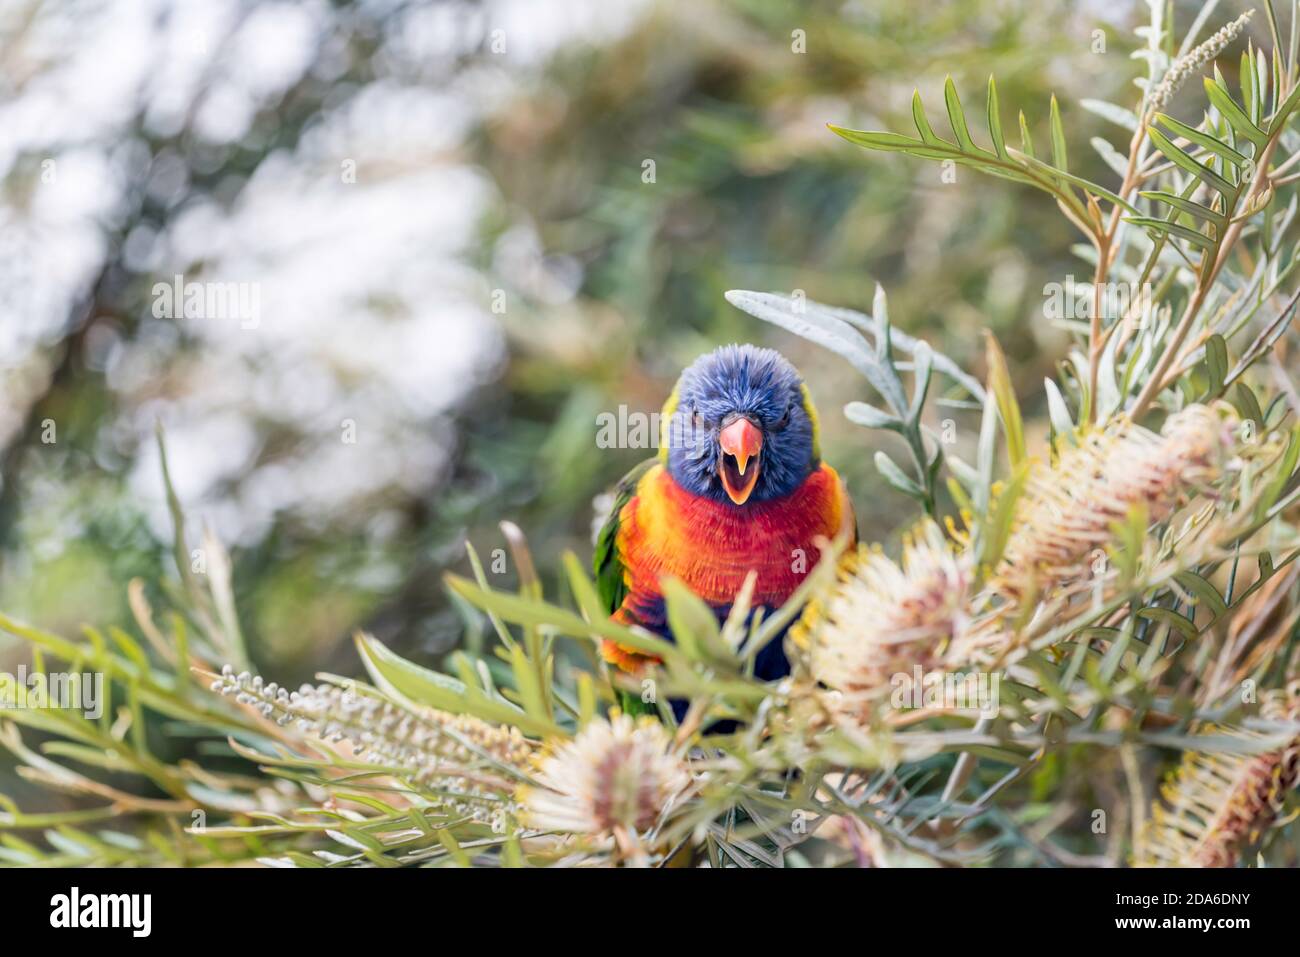 An Australian Rainbow Lorikeet (Trichoglossus moluccanus) a variety of Australian parrot, front on and looking angry while feeding in a Grevillea bush Stock Photo